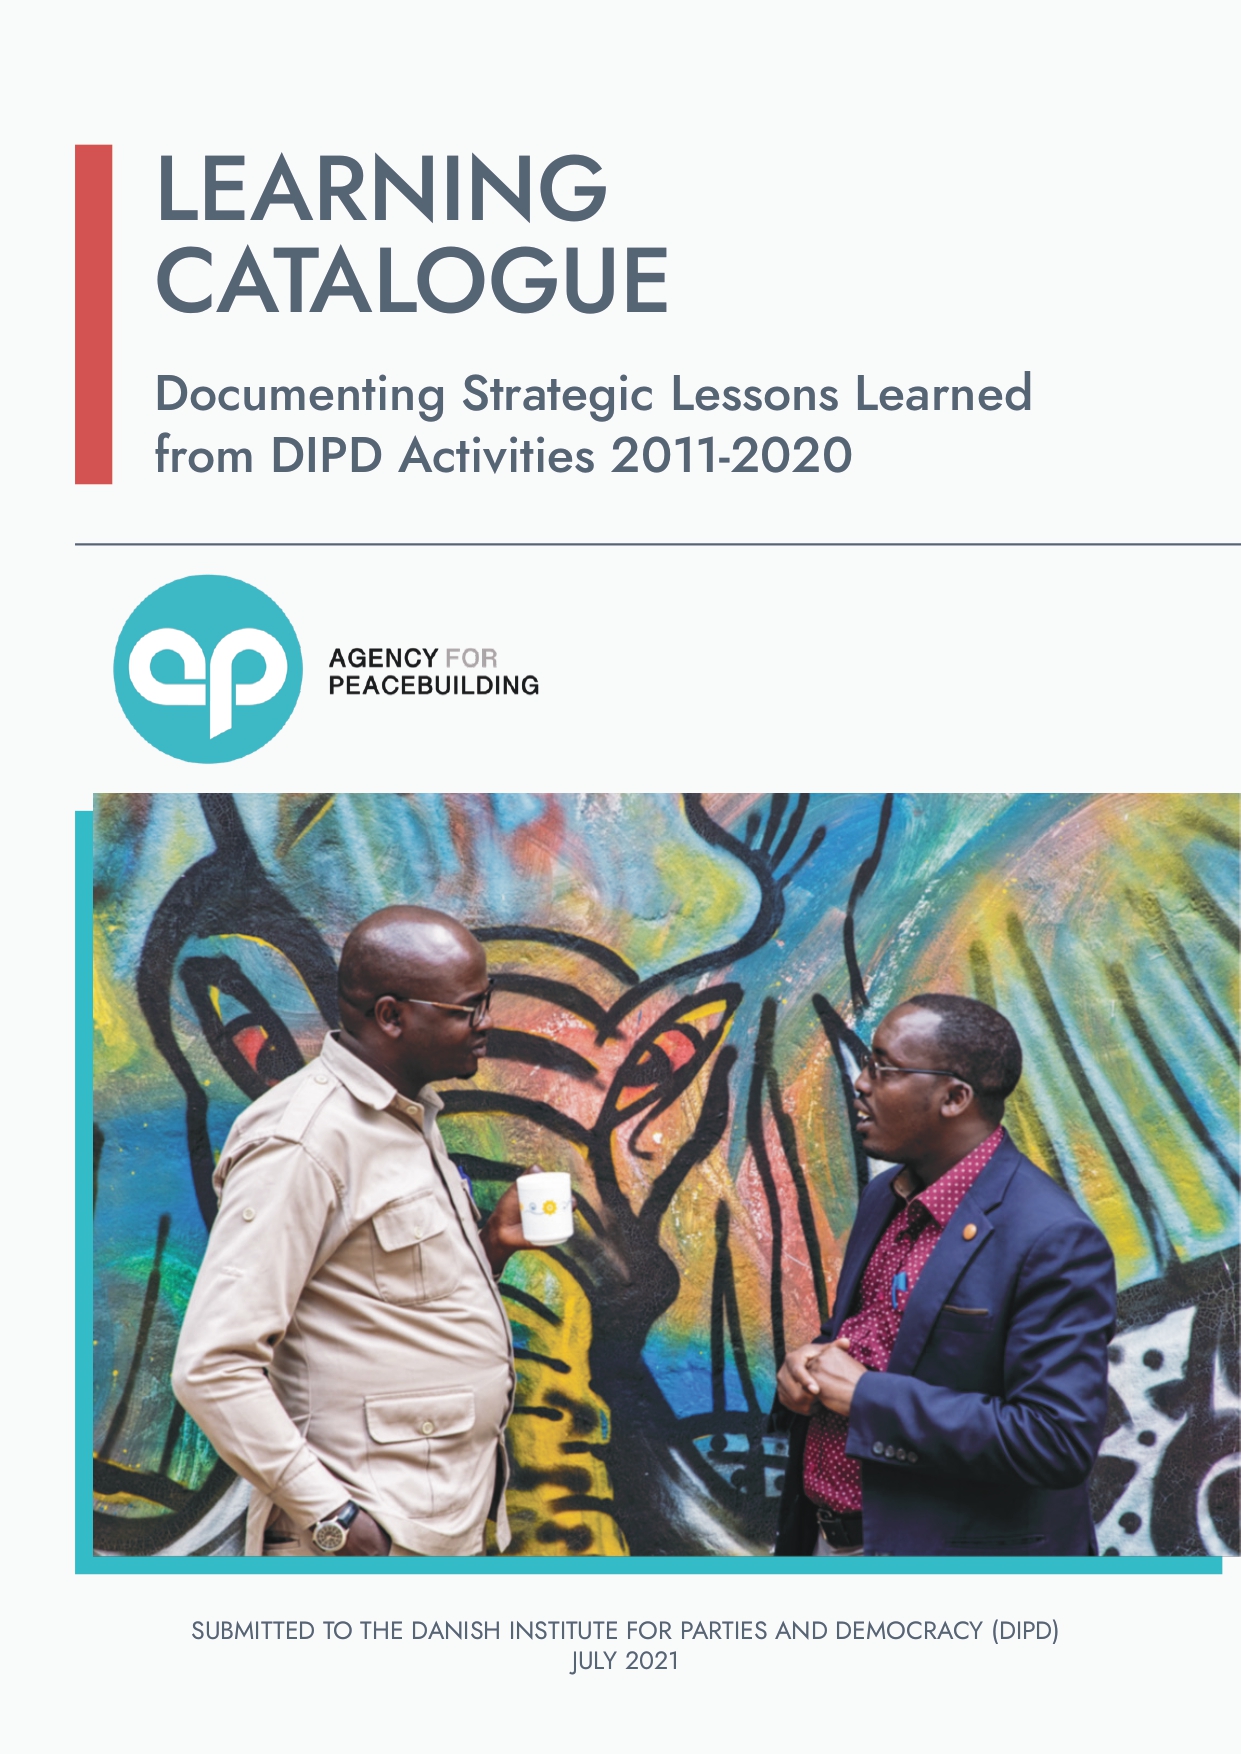 DIPD learning catalogue